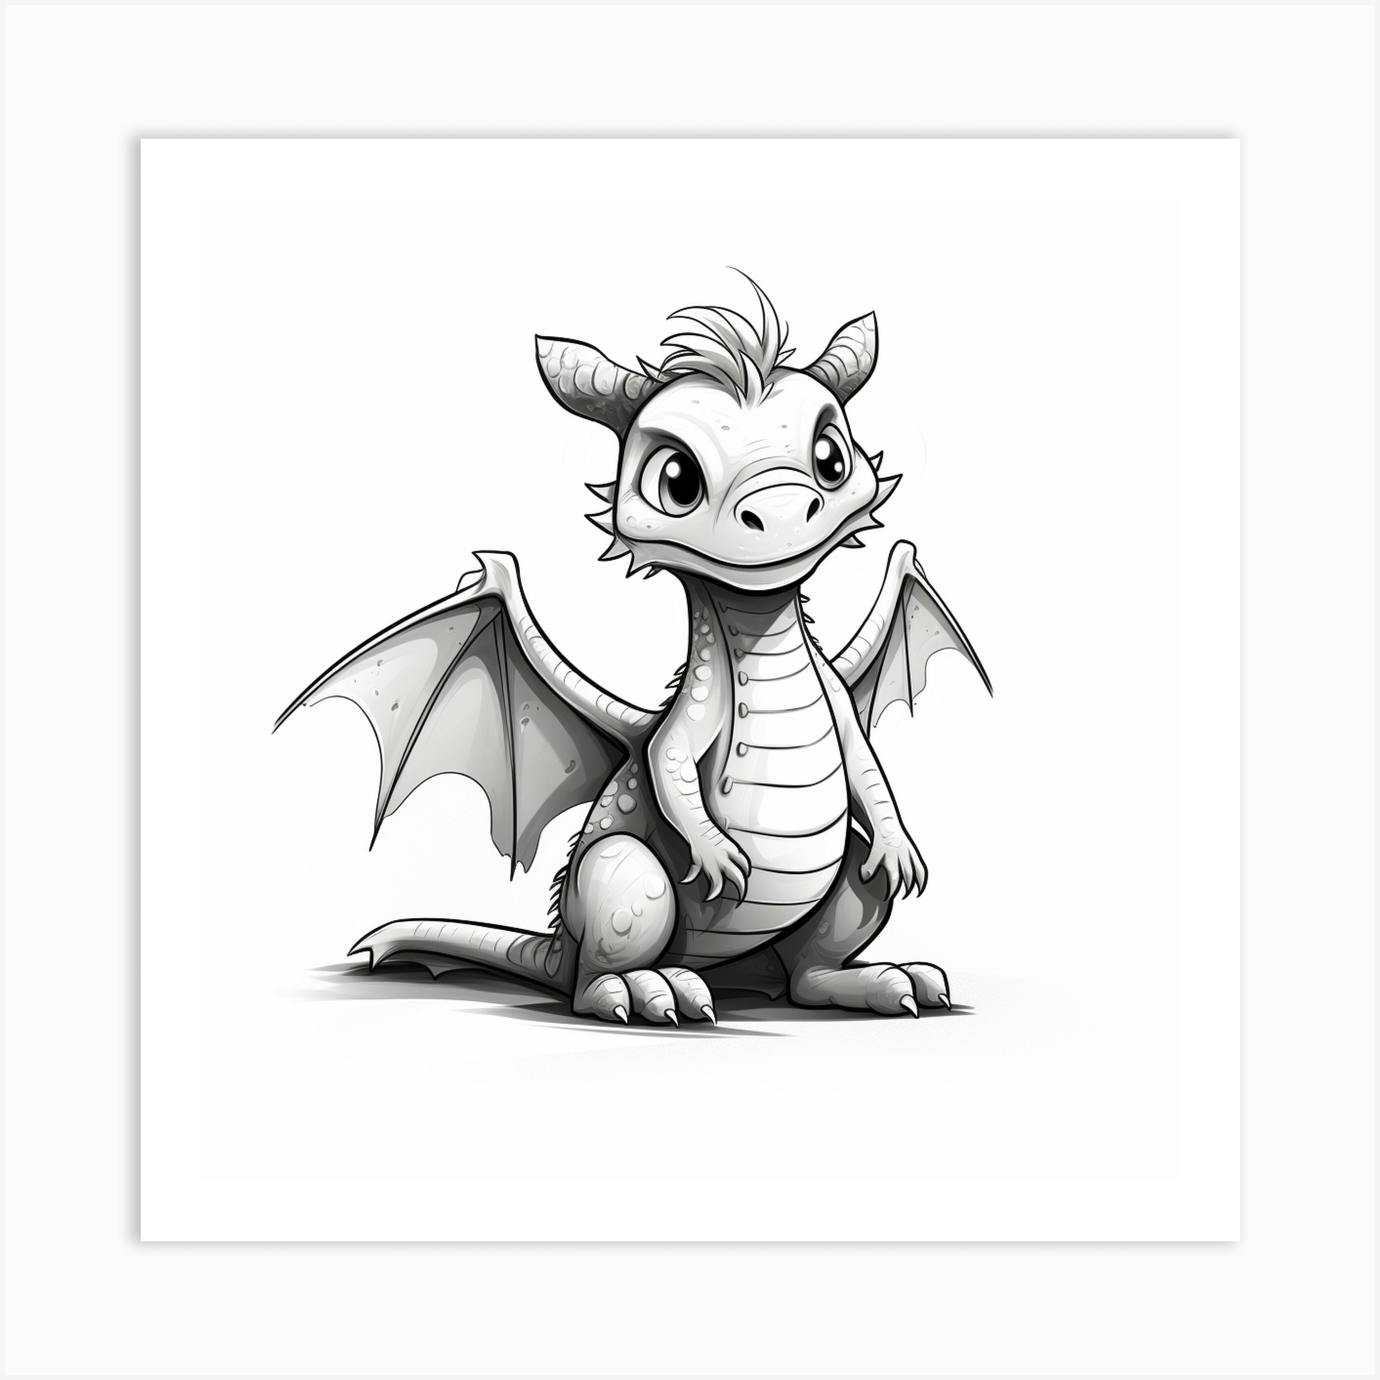 Coloring page outline of cute dragon Royalty Free Vector